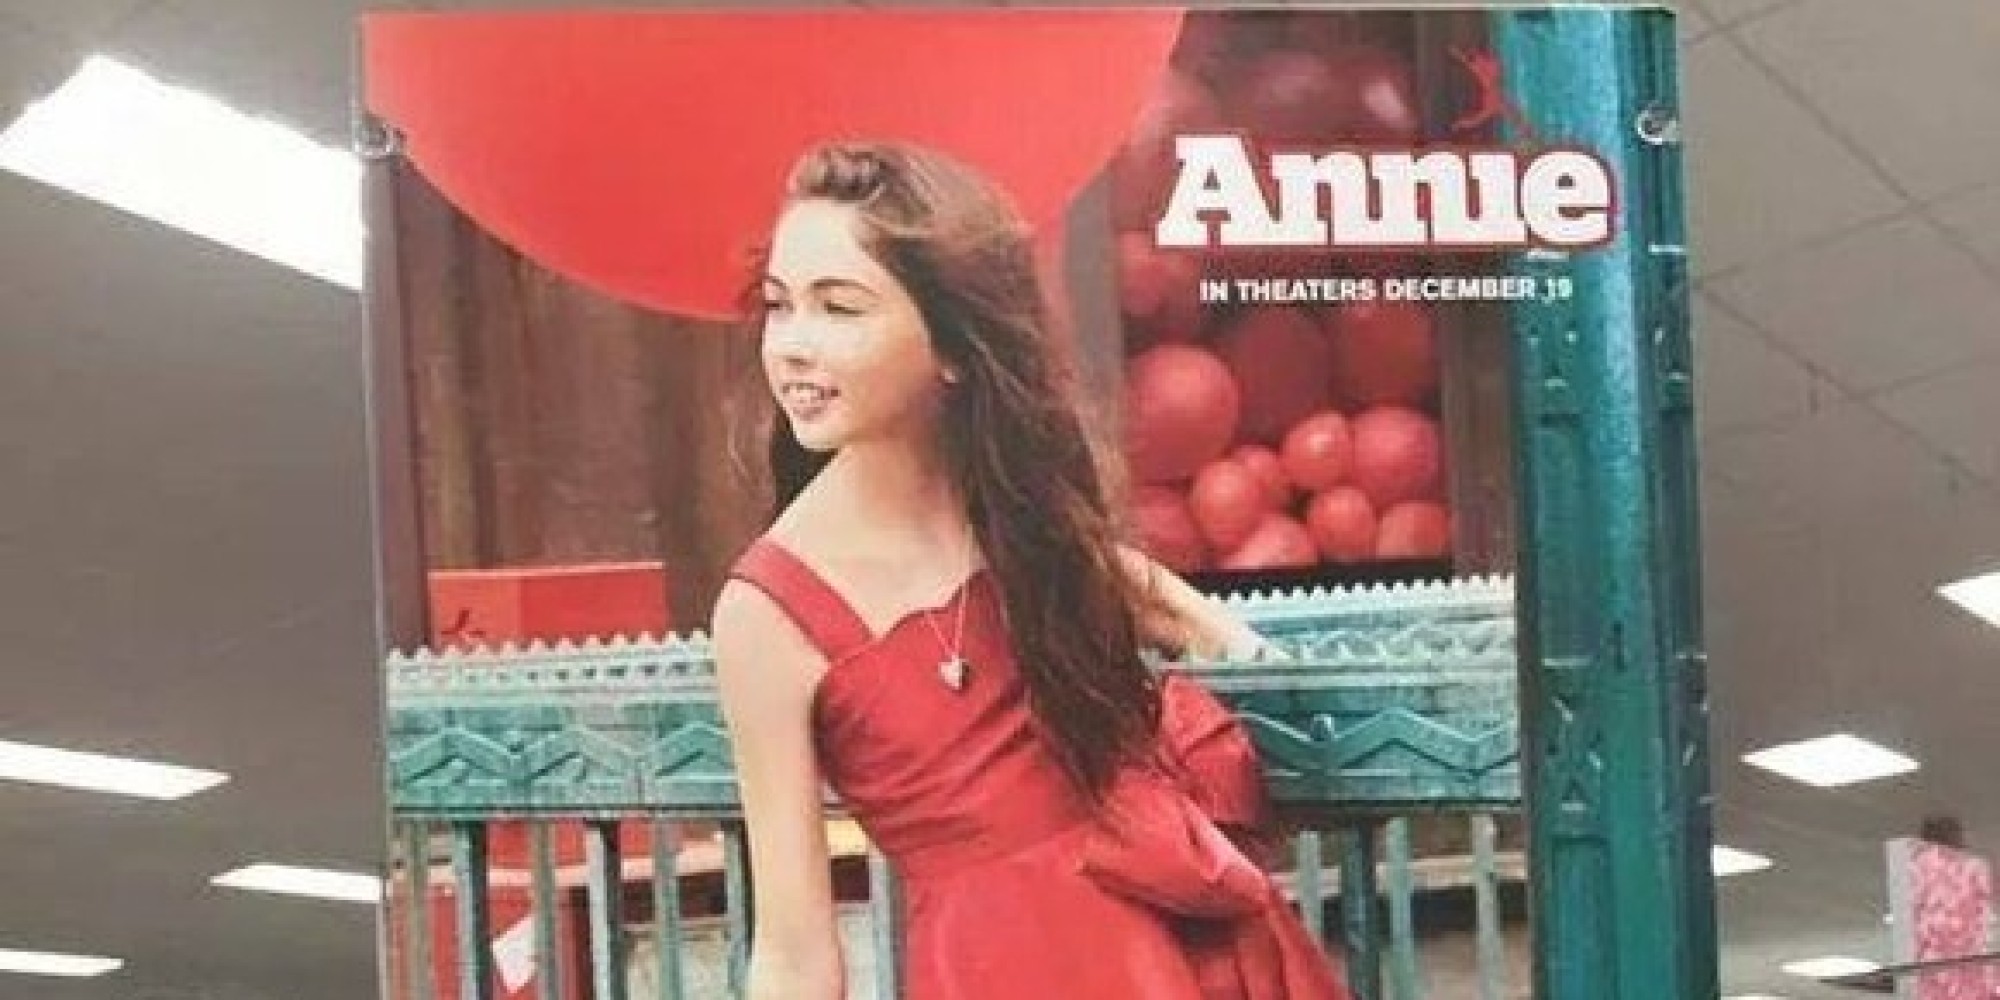 Target Under Fire For Using White Model In 'Annie' Clothing Ads ...